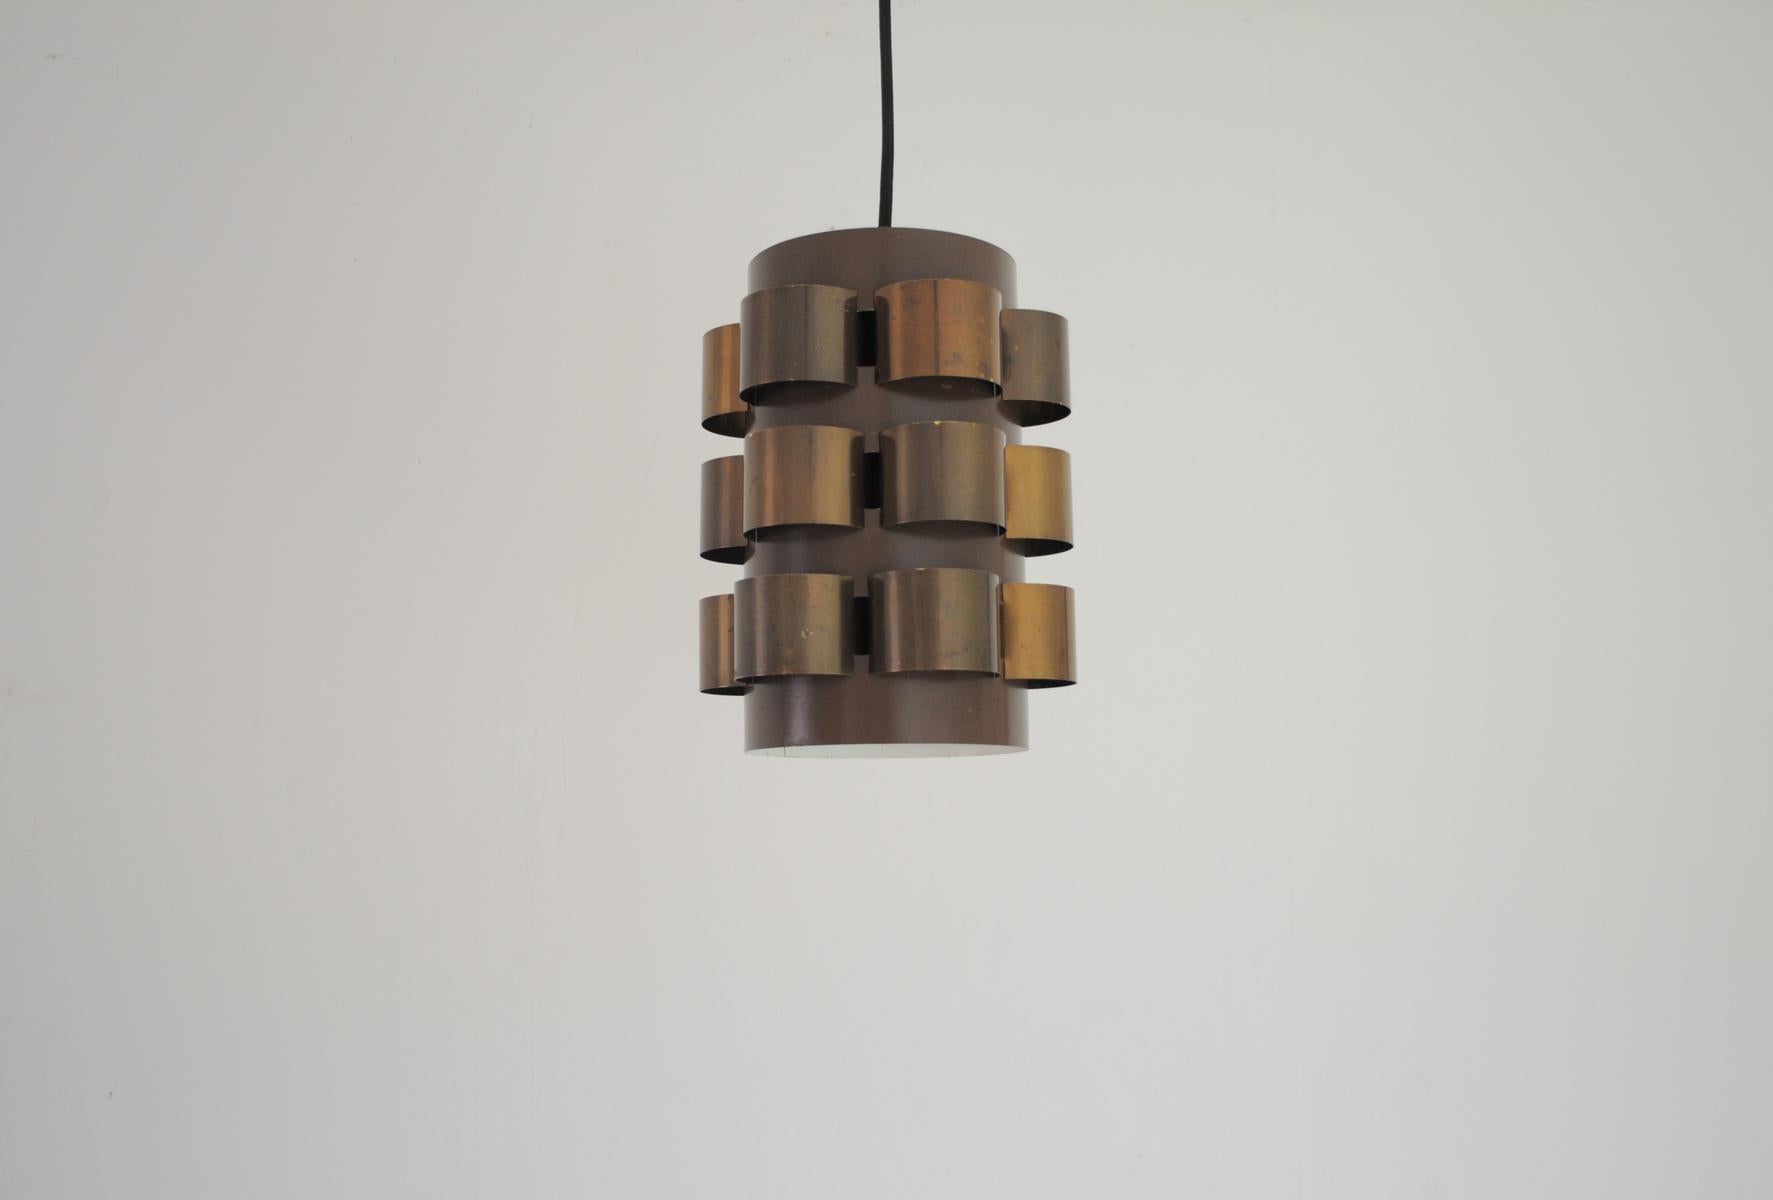 Danish lamp with beautifully patinated brass elements, designed by Werner Schou and produced by Coronell in Denmark during the 1960s. The cylindrical brown shape of the lamp casts warm light. It features a fine brass E27 bulb holder.

Signs of